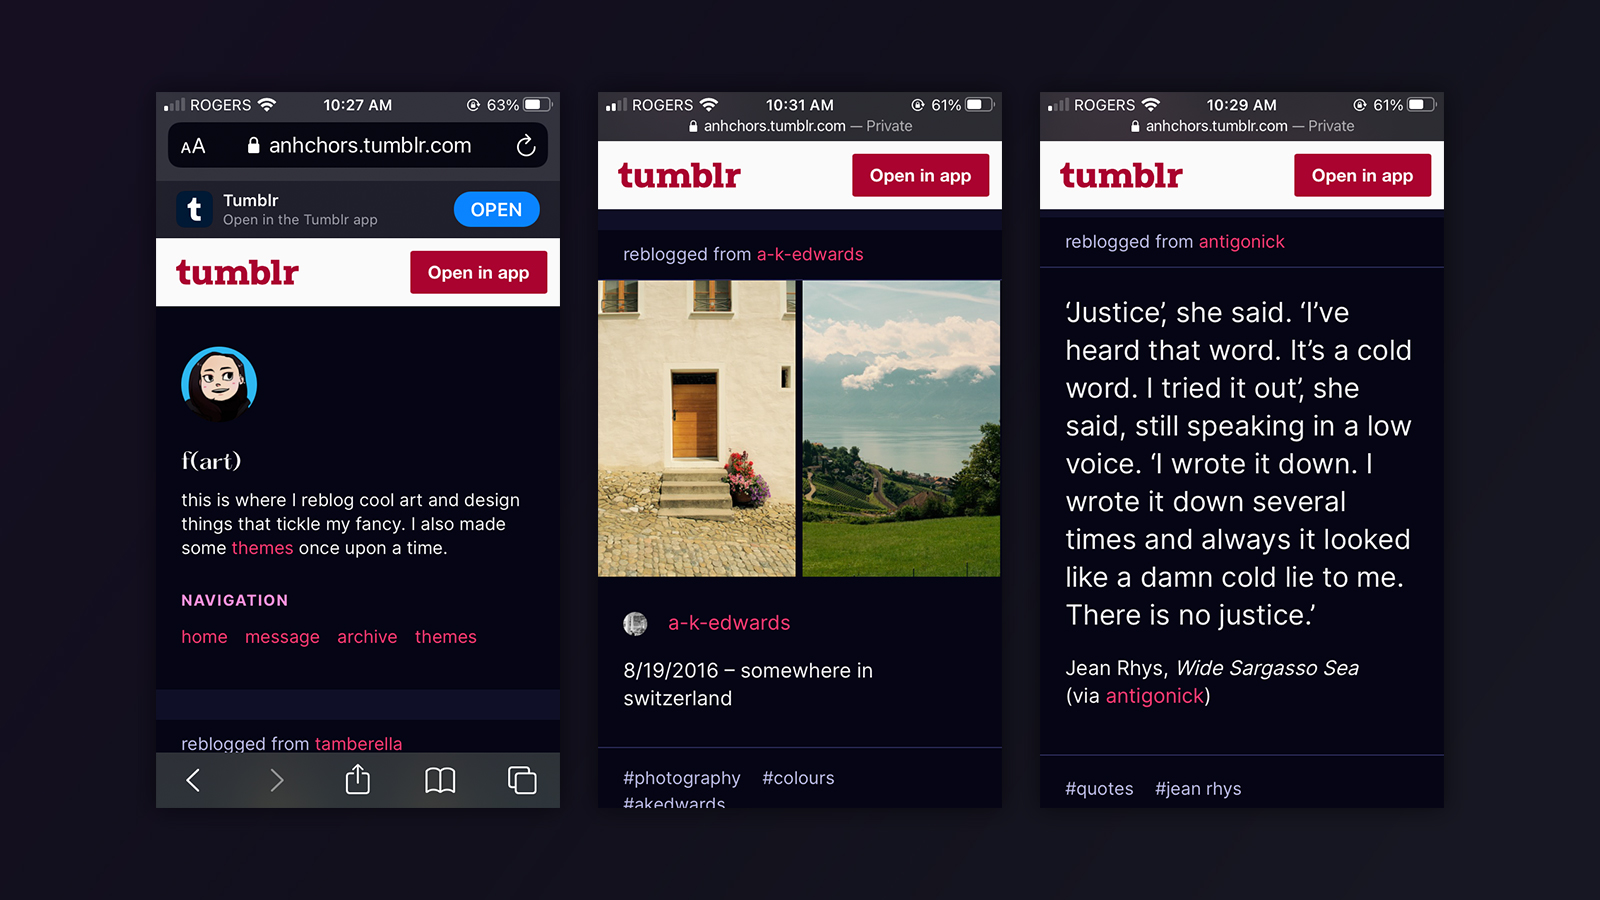 Mobile view of the theme, which includes annoying header bars nagging the user to download the Tumblr app.